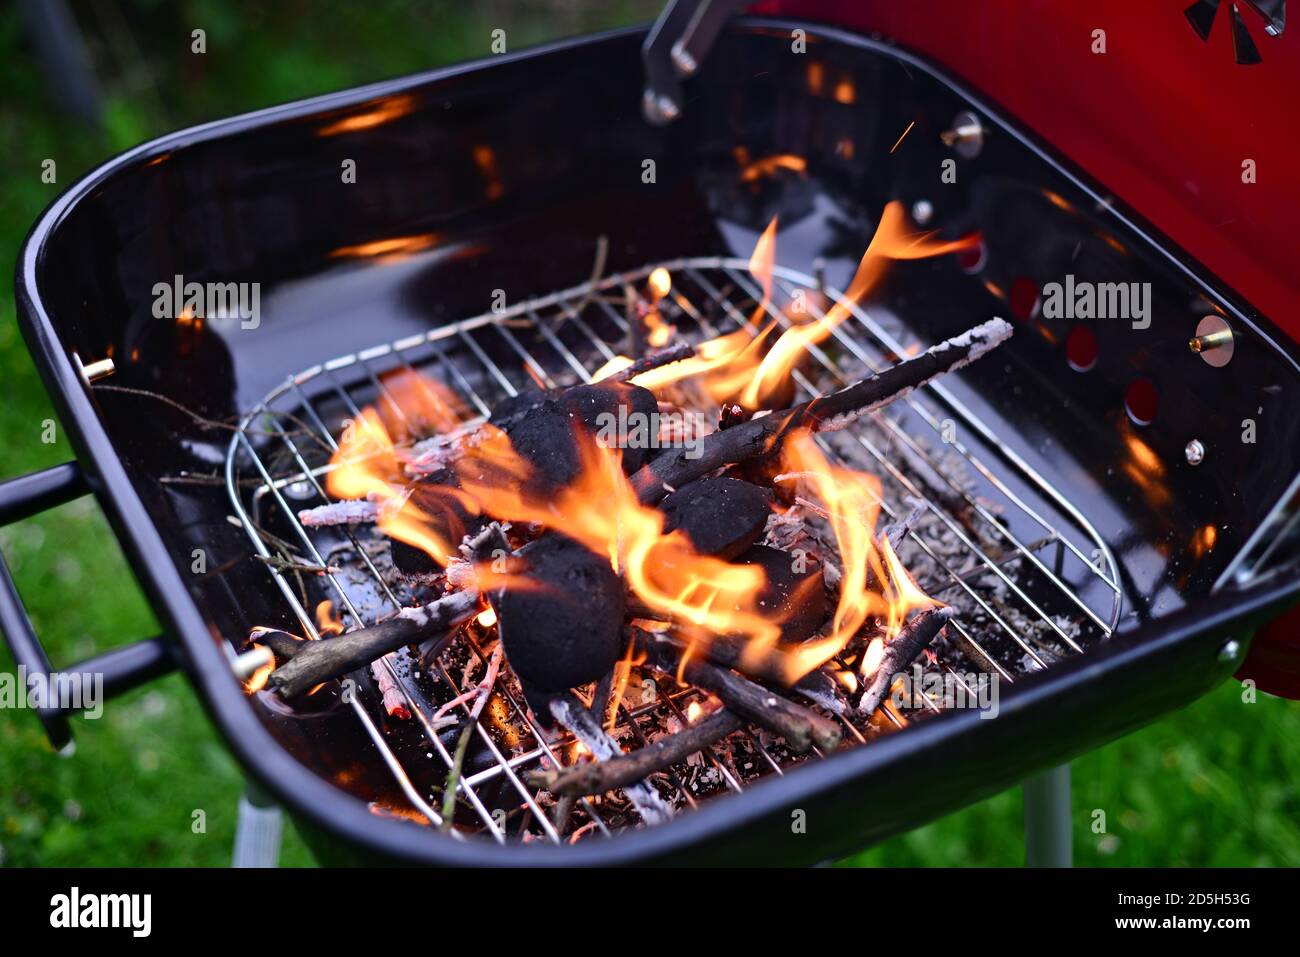 Garden grill with burning wood and charcoal. Summer barbecue in the garden. Stock Photo